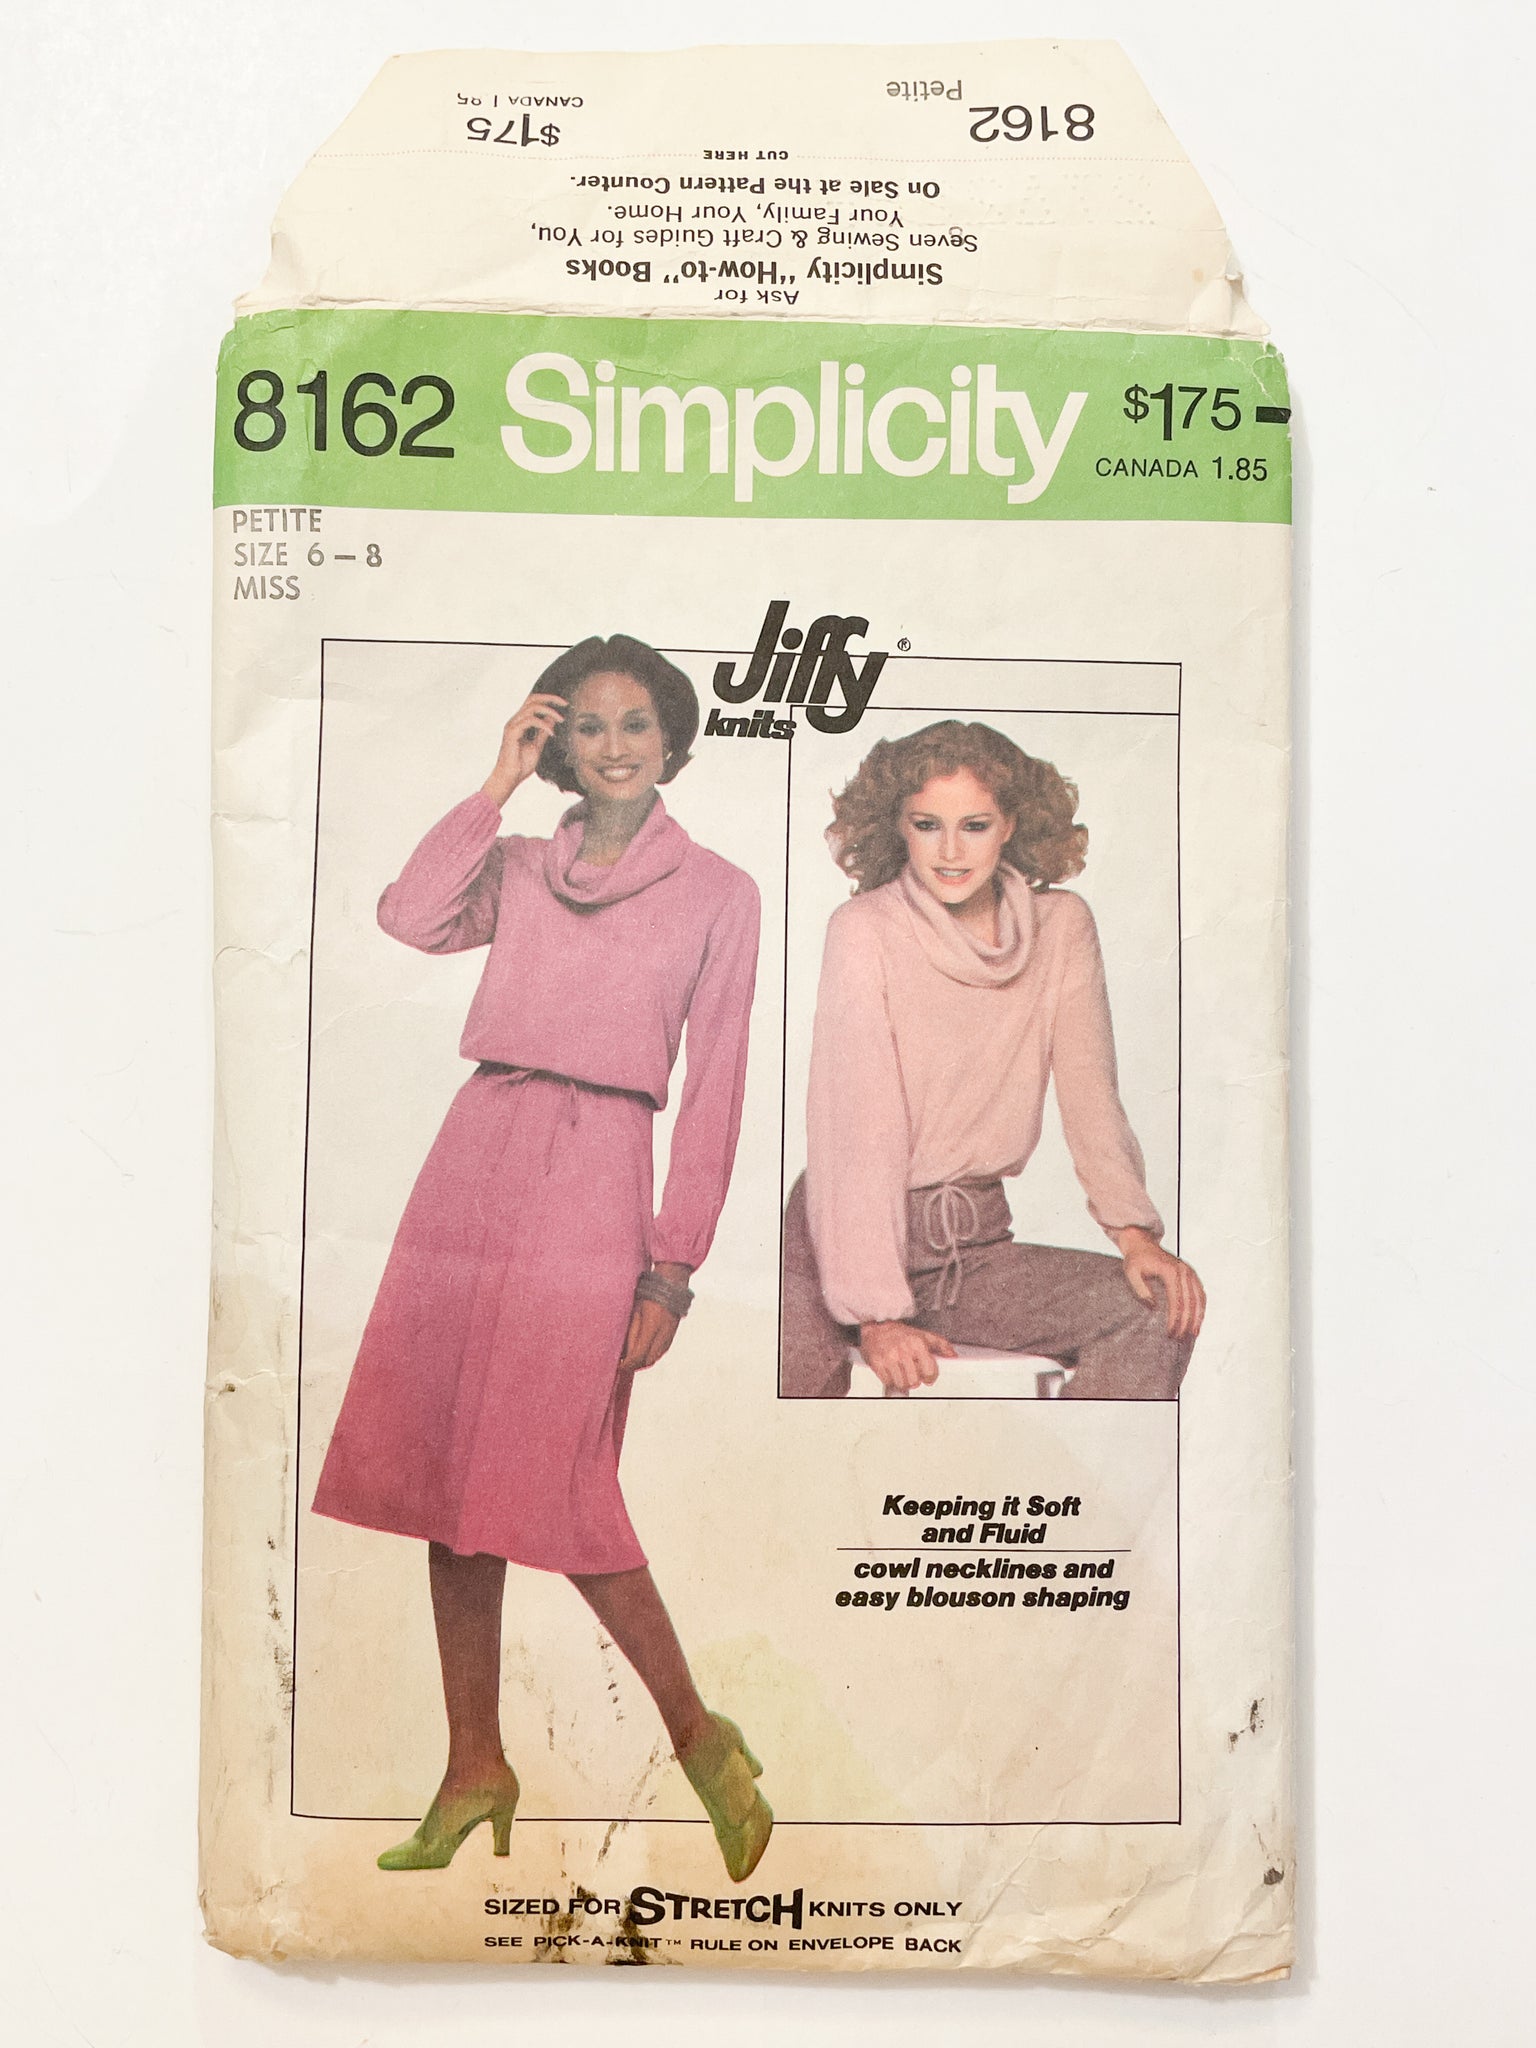 SALE 1977 Simplicity 8162 Pattern - Knit Top and Skirt